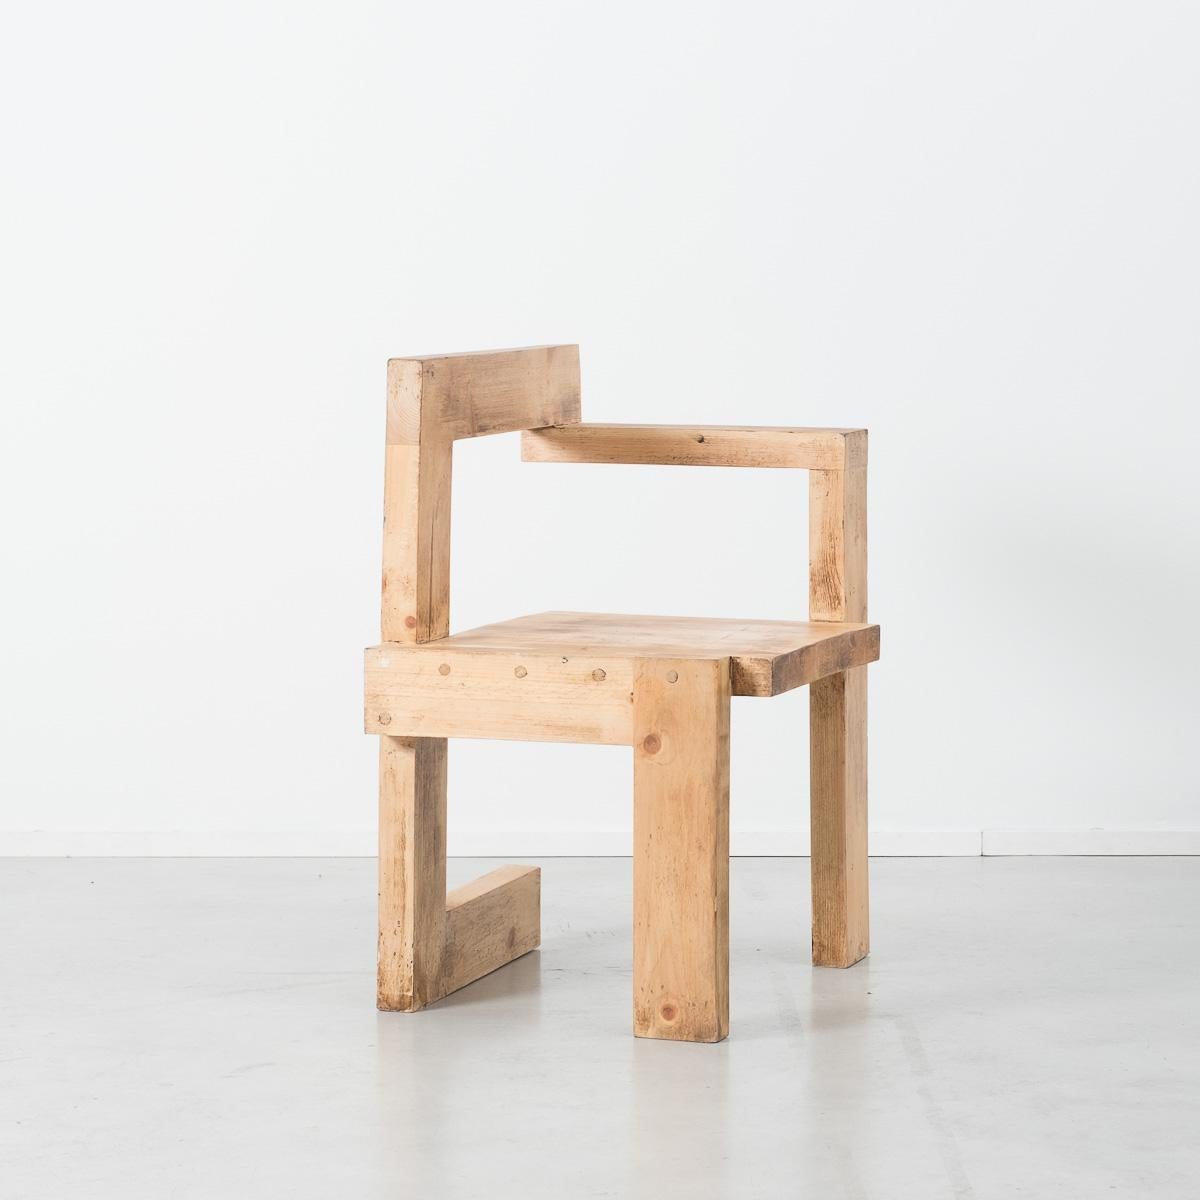 Gerrit Rietveld’s work has been of great importance to the development of architects and designers like Breuer and Aalto. The iconic Steltman chair was originally designed by Rietveld as a commission for the Steltman jewellery store in the